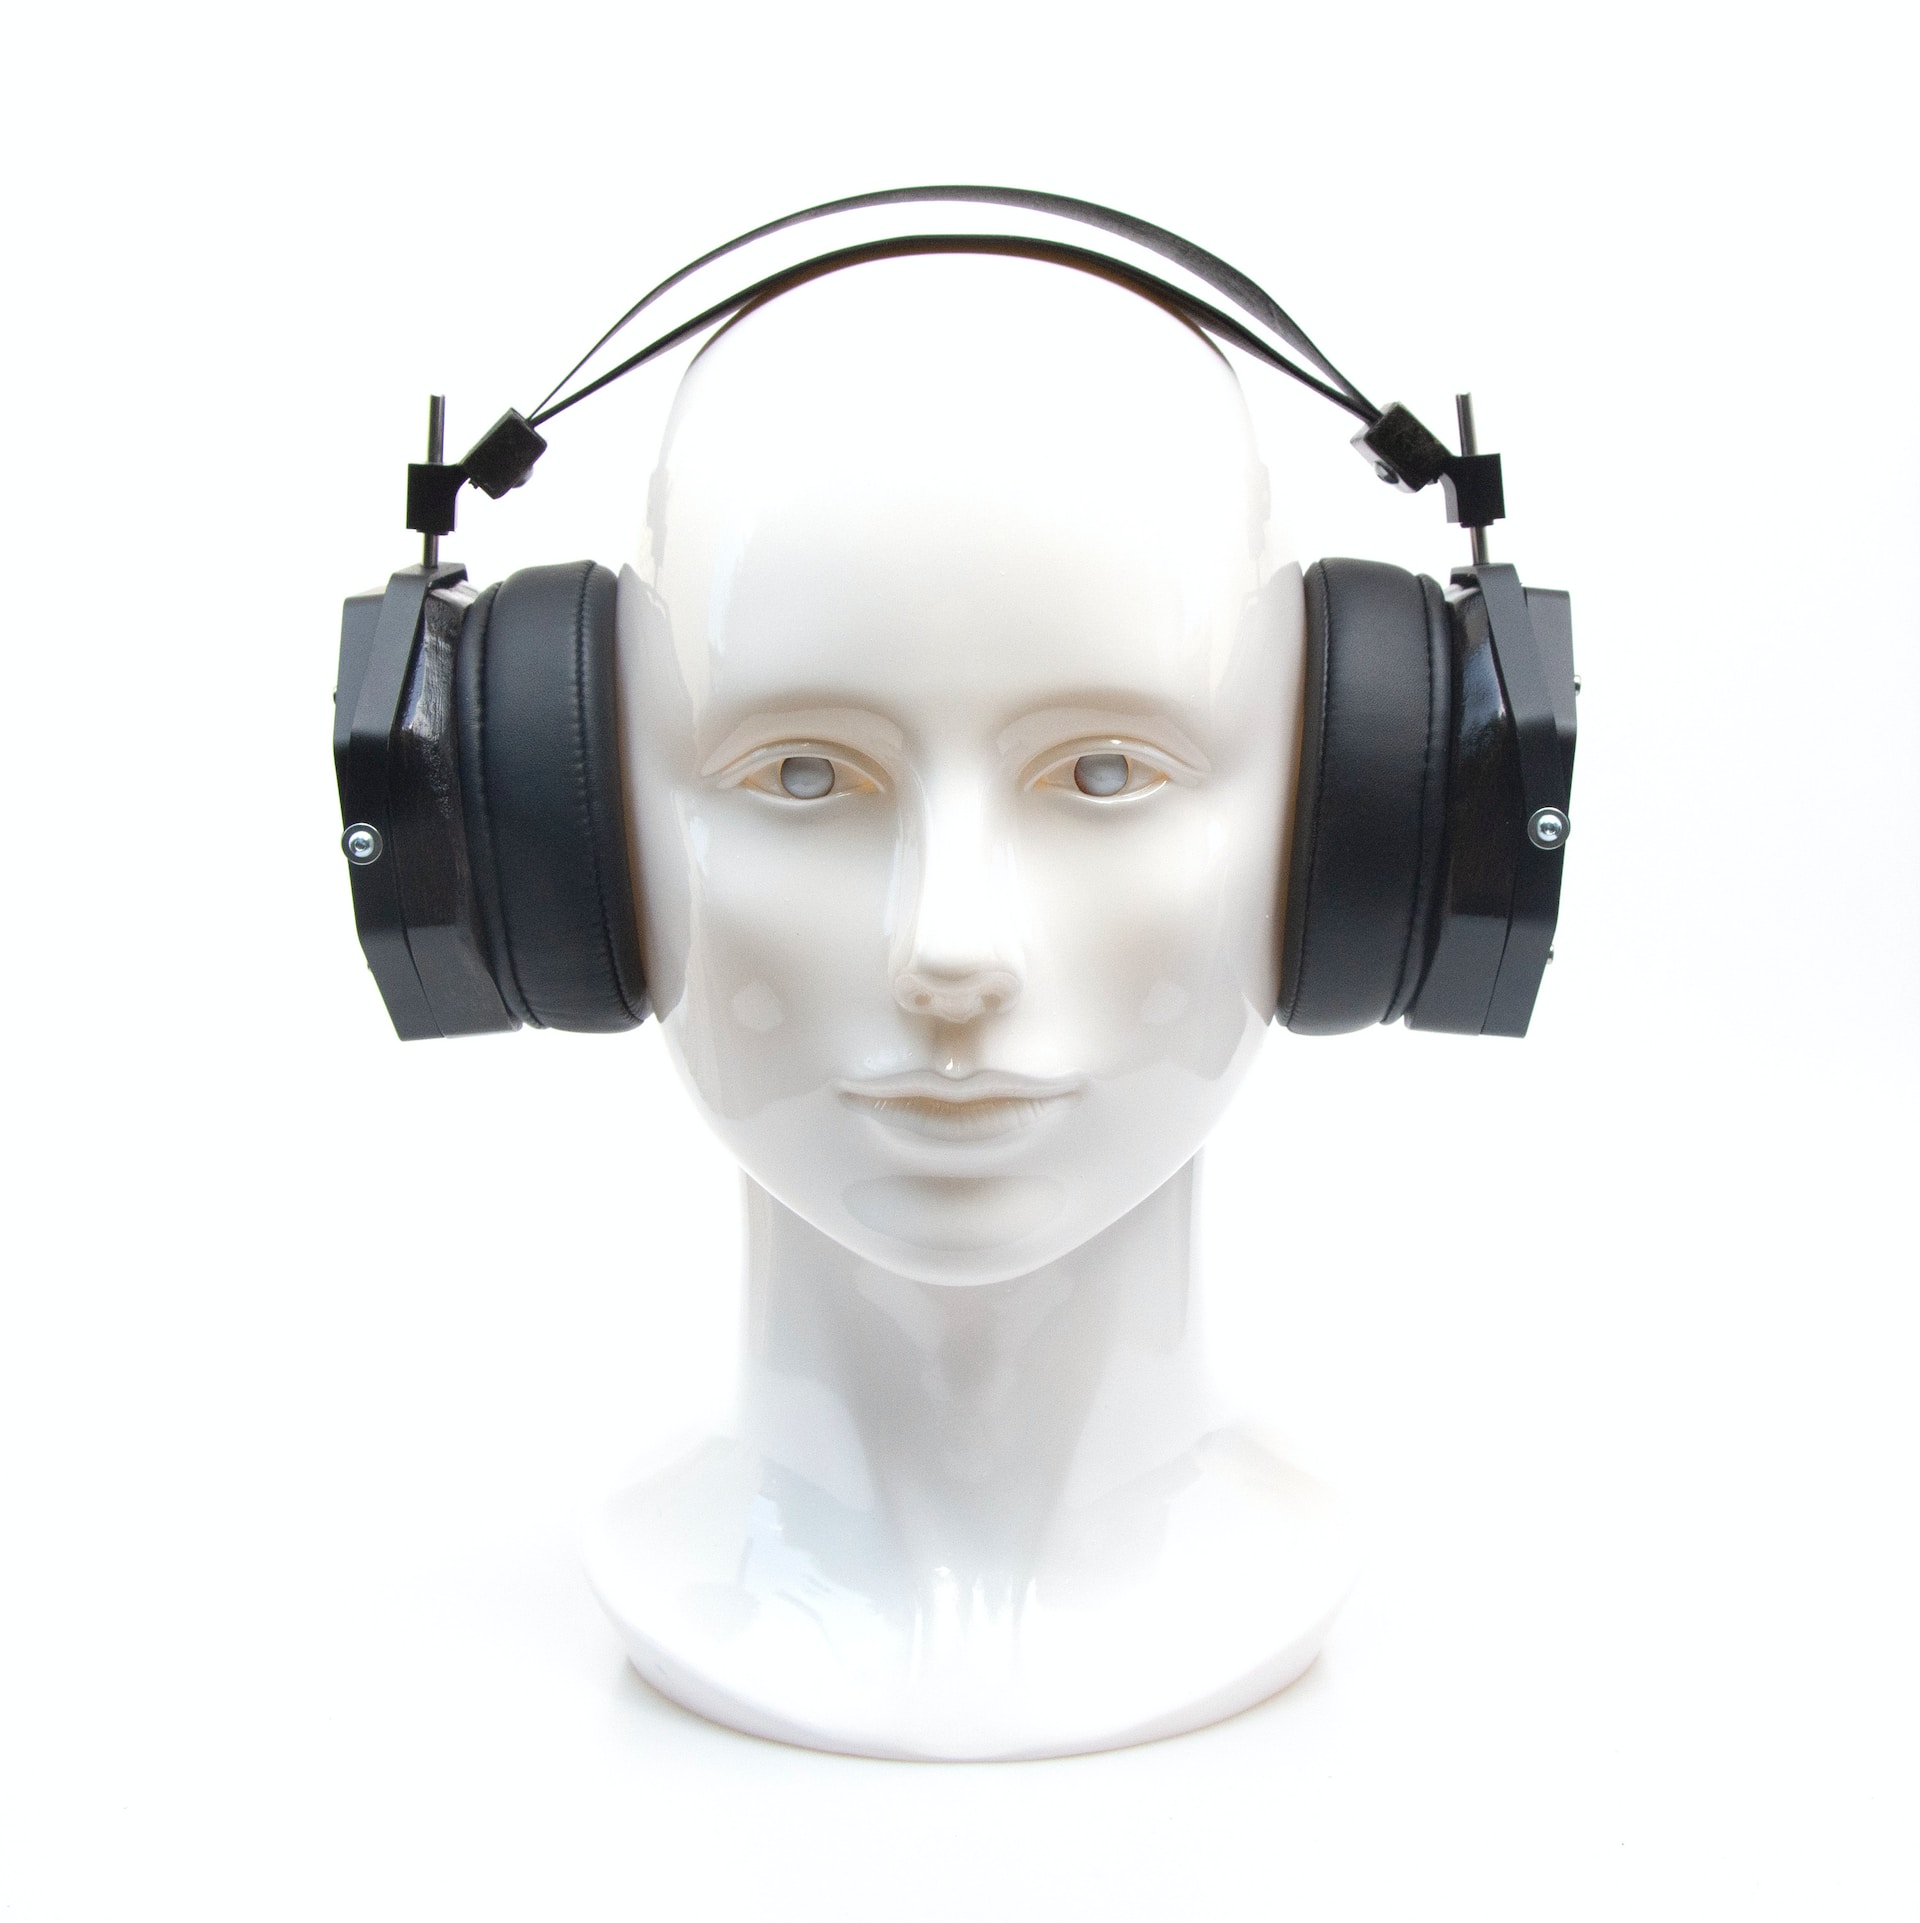 test for bass frequency response accuracy on headphones